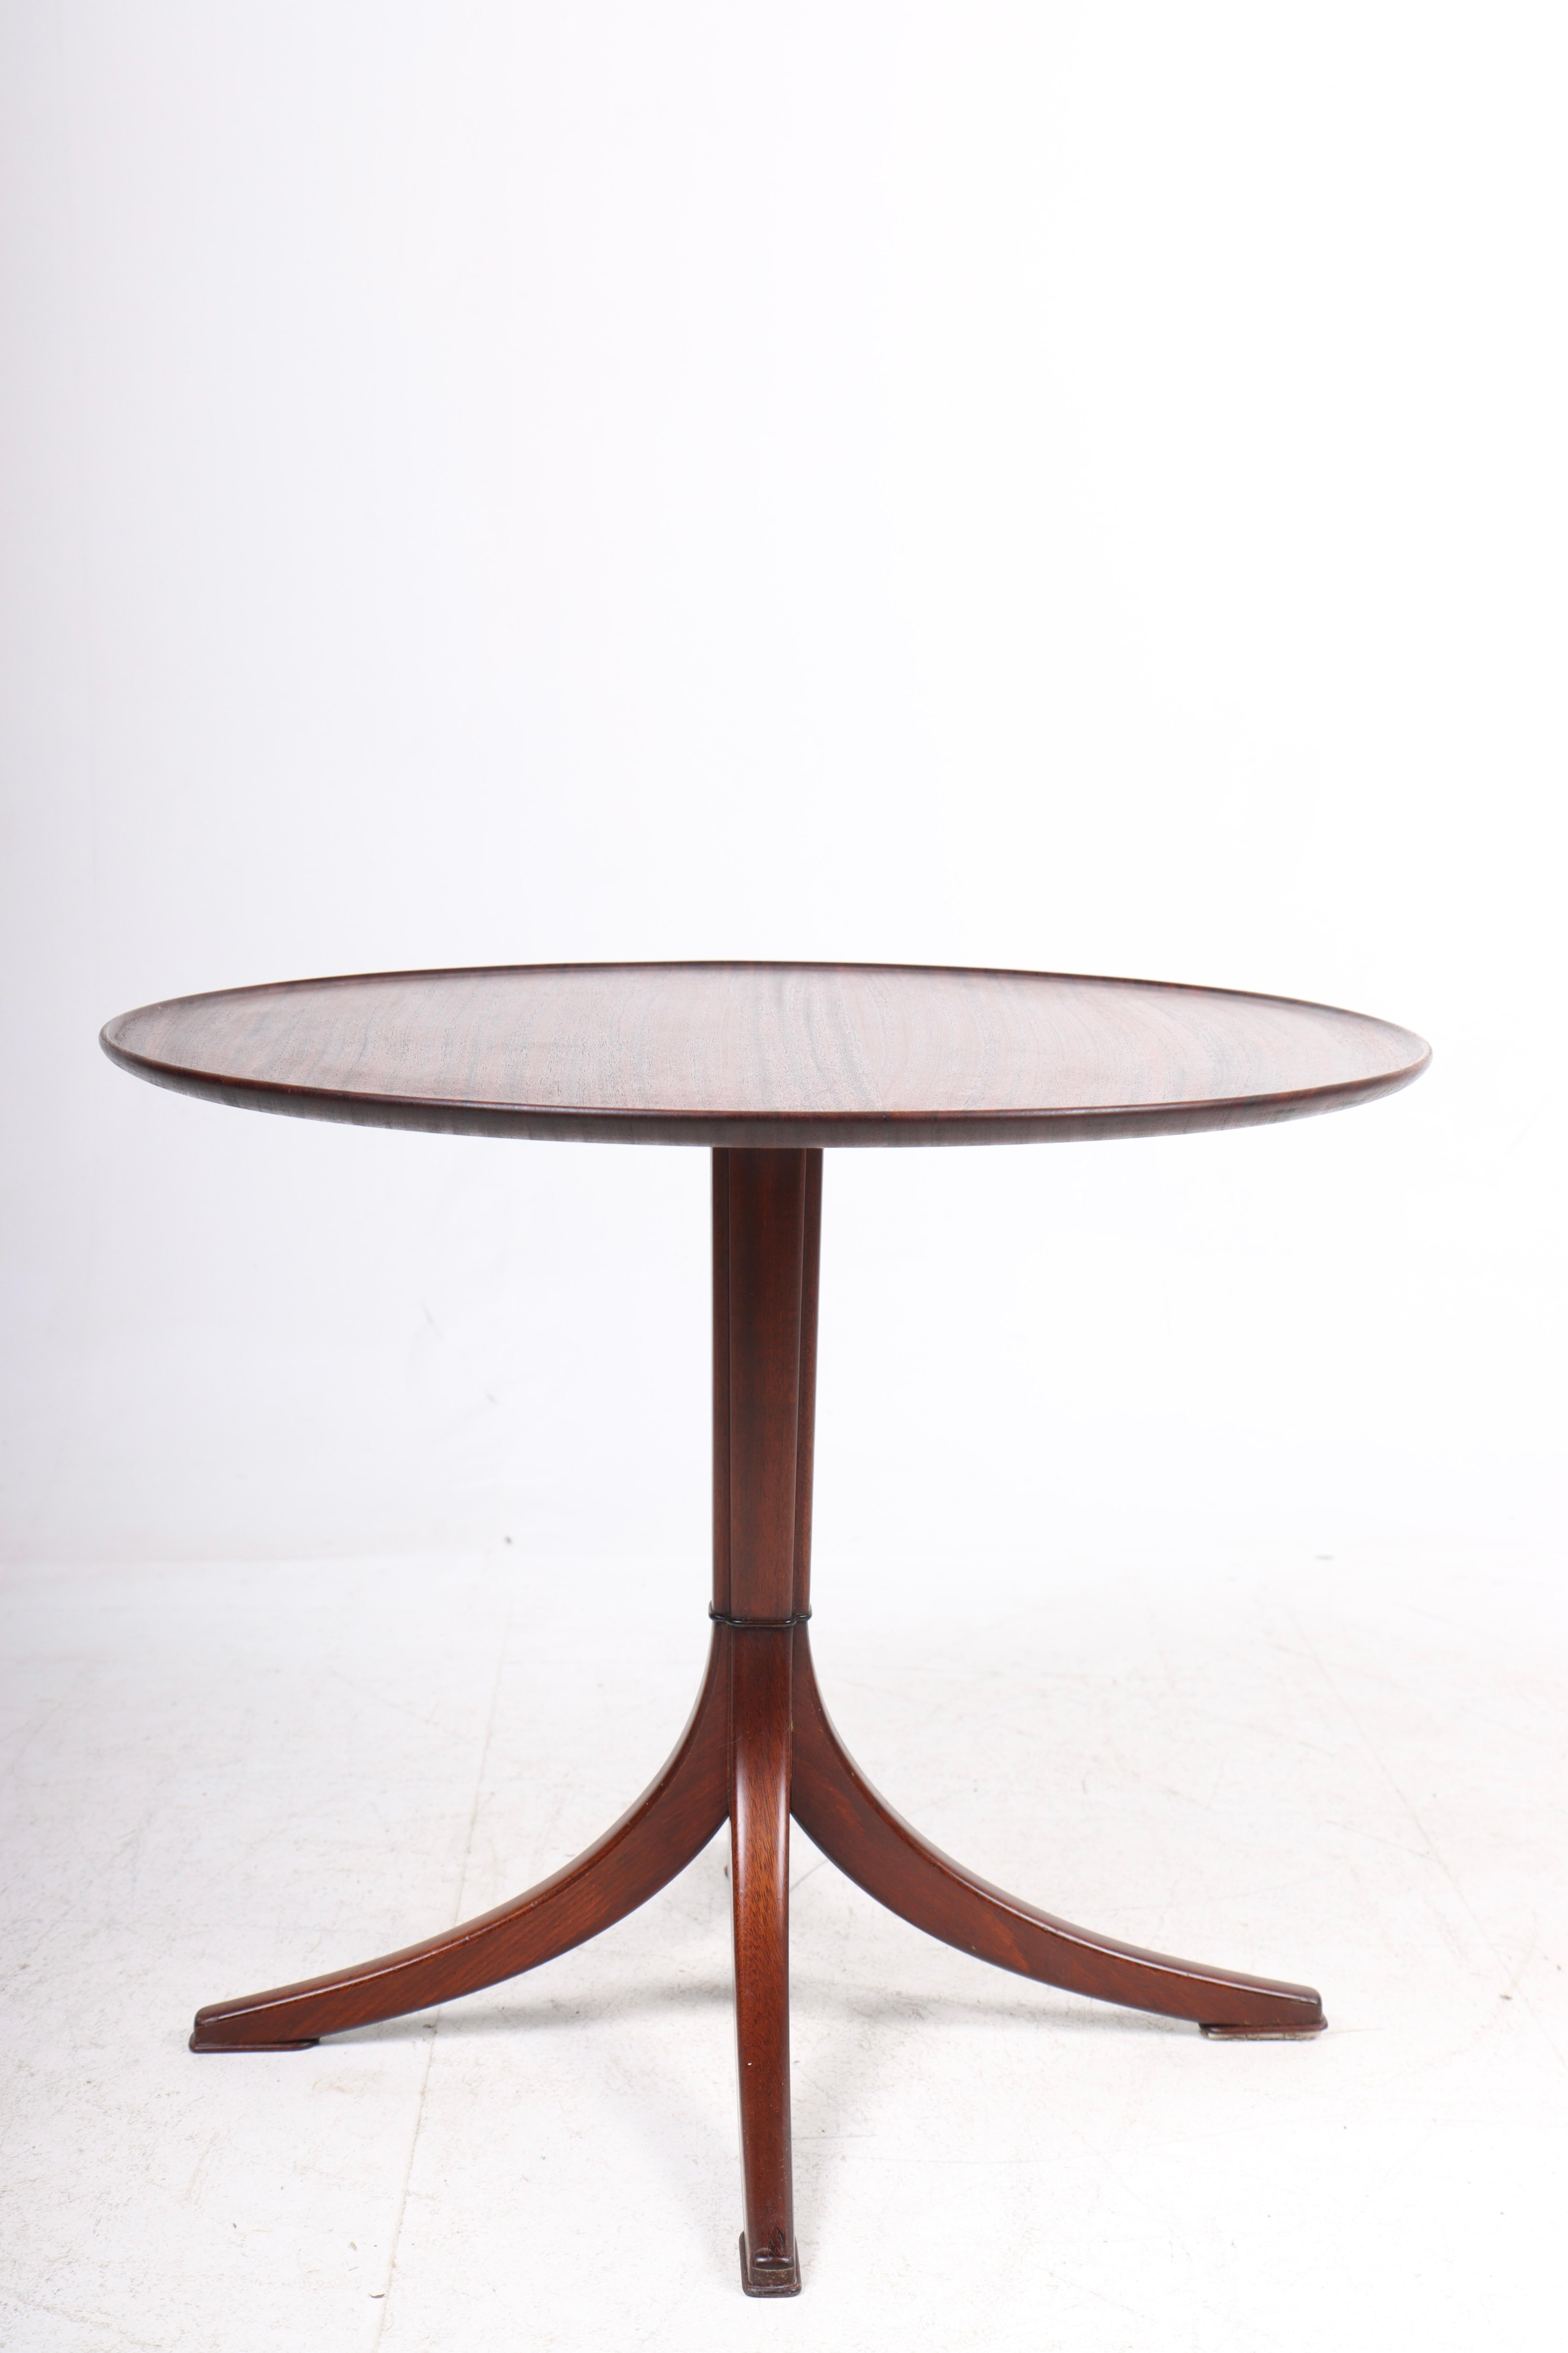 Scandinavian Modern Midcentury Danish Low Table, Solid Mahogany by Cabinetmaker Frits Henningsen For Sale